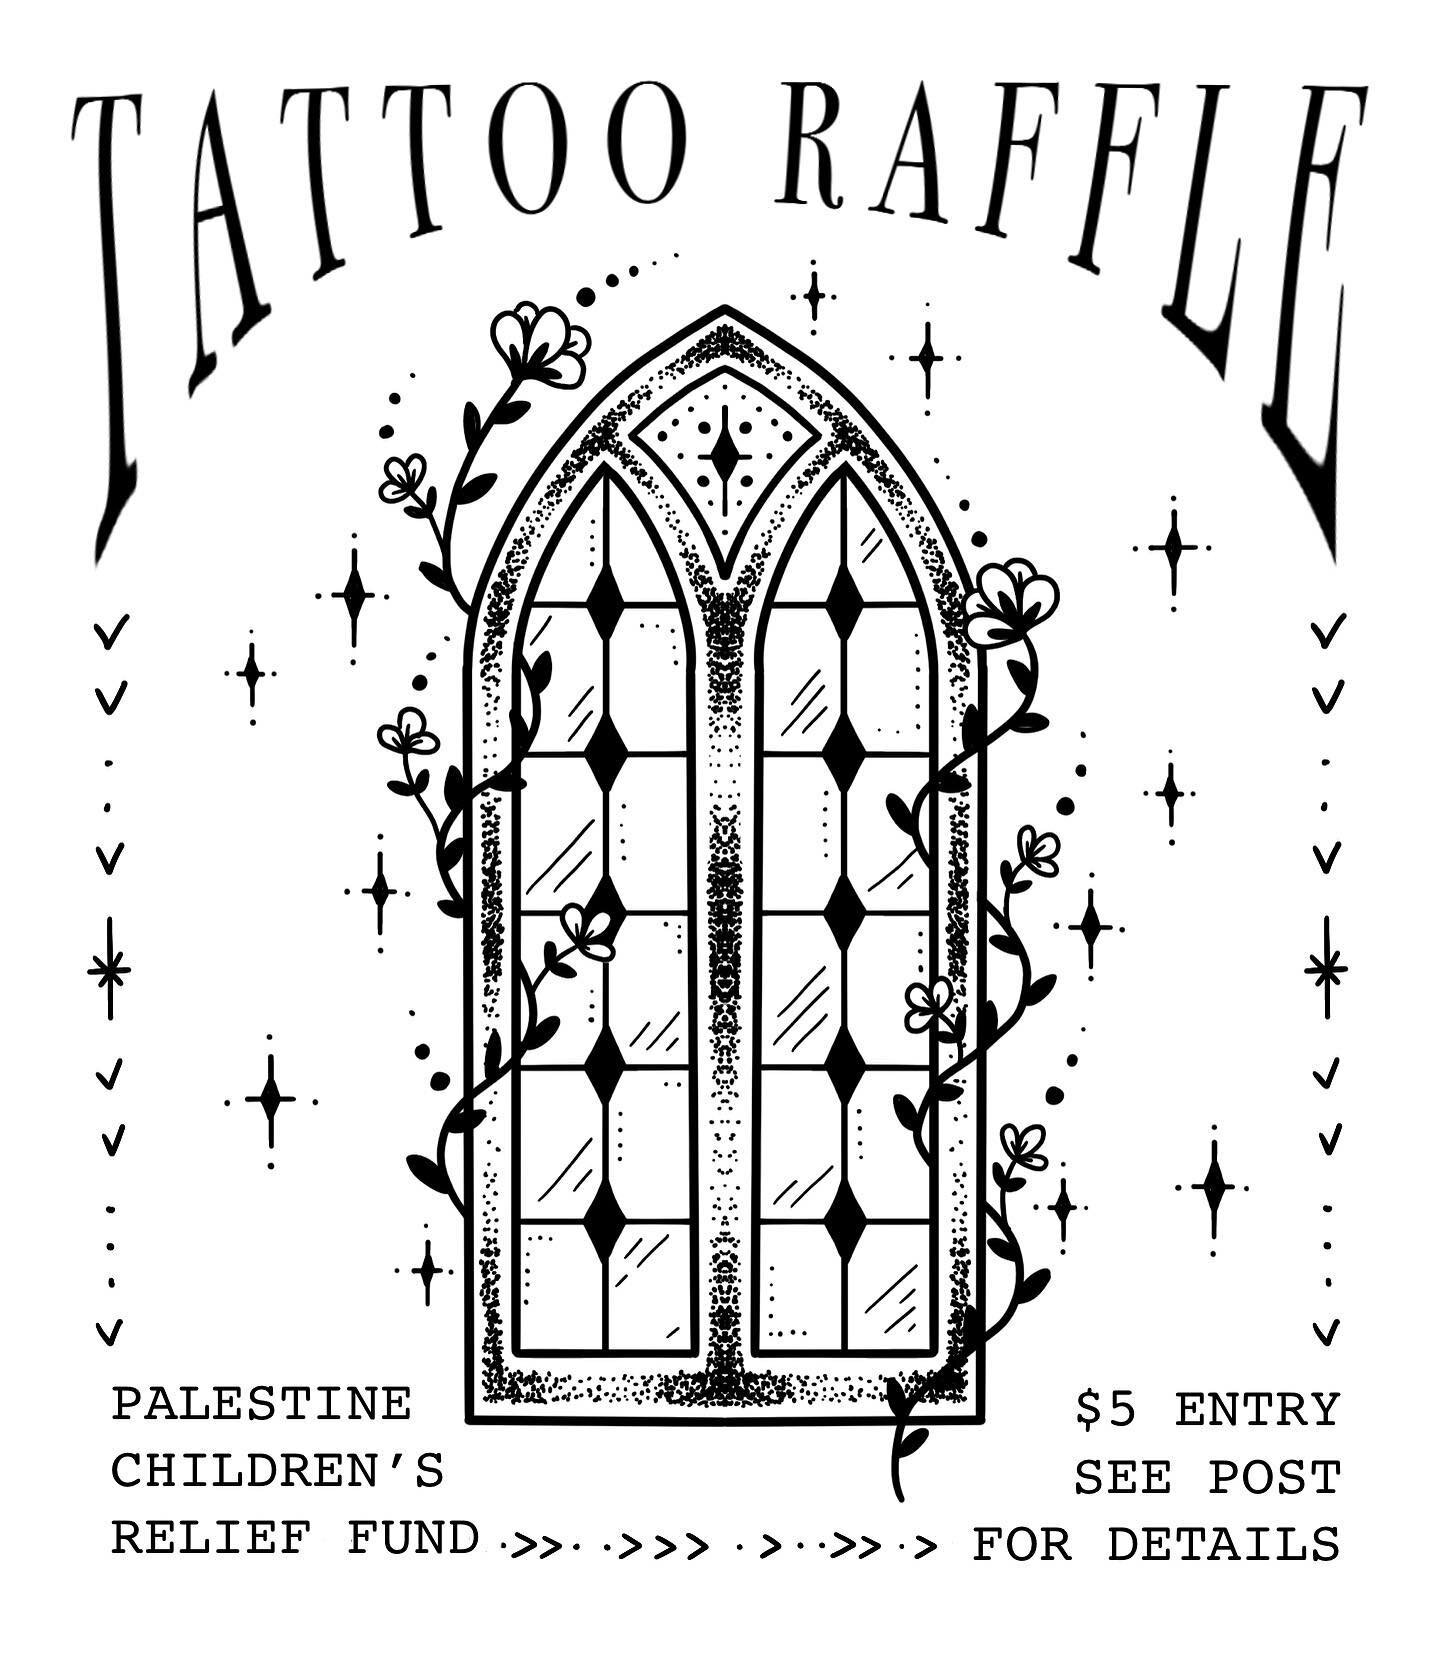 &bull;*⊹ TATTOO RVFFLE ⊹*&bull;
Winn3r will receive a $500 tattoo credit and first choice towards any upcoming flash sheet. All proceeds will be donated to @thepcrf 
How to enter:
&bull; 1 entry = $5
&bull; Enter as many times as you want (adjust amo